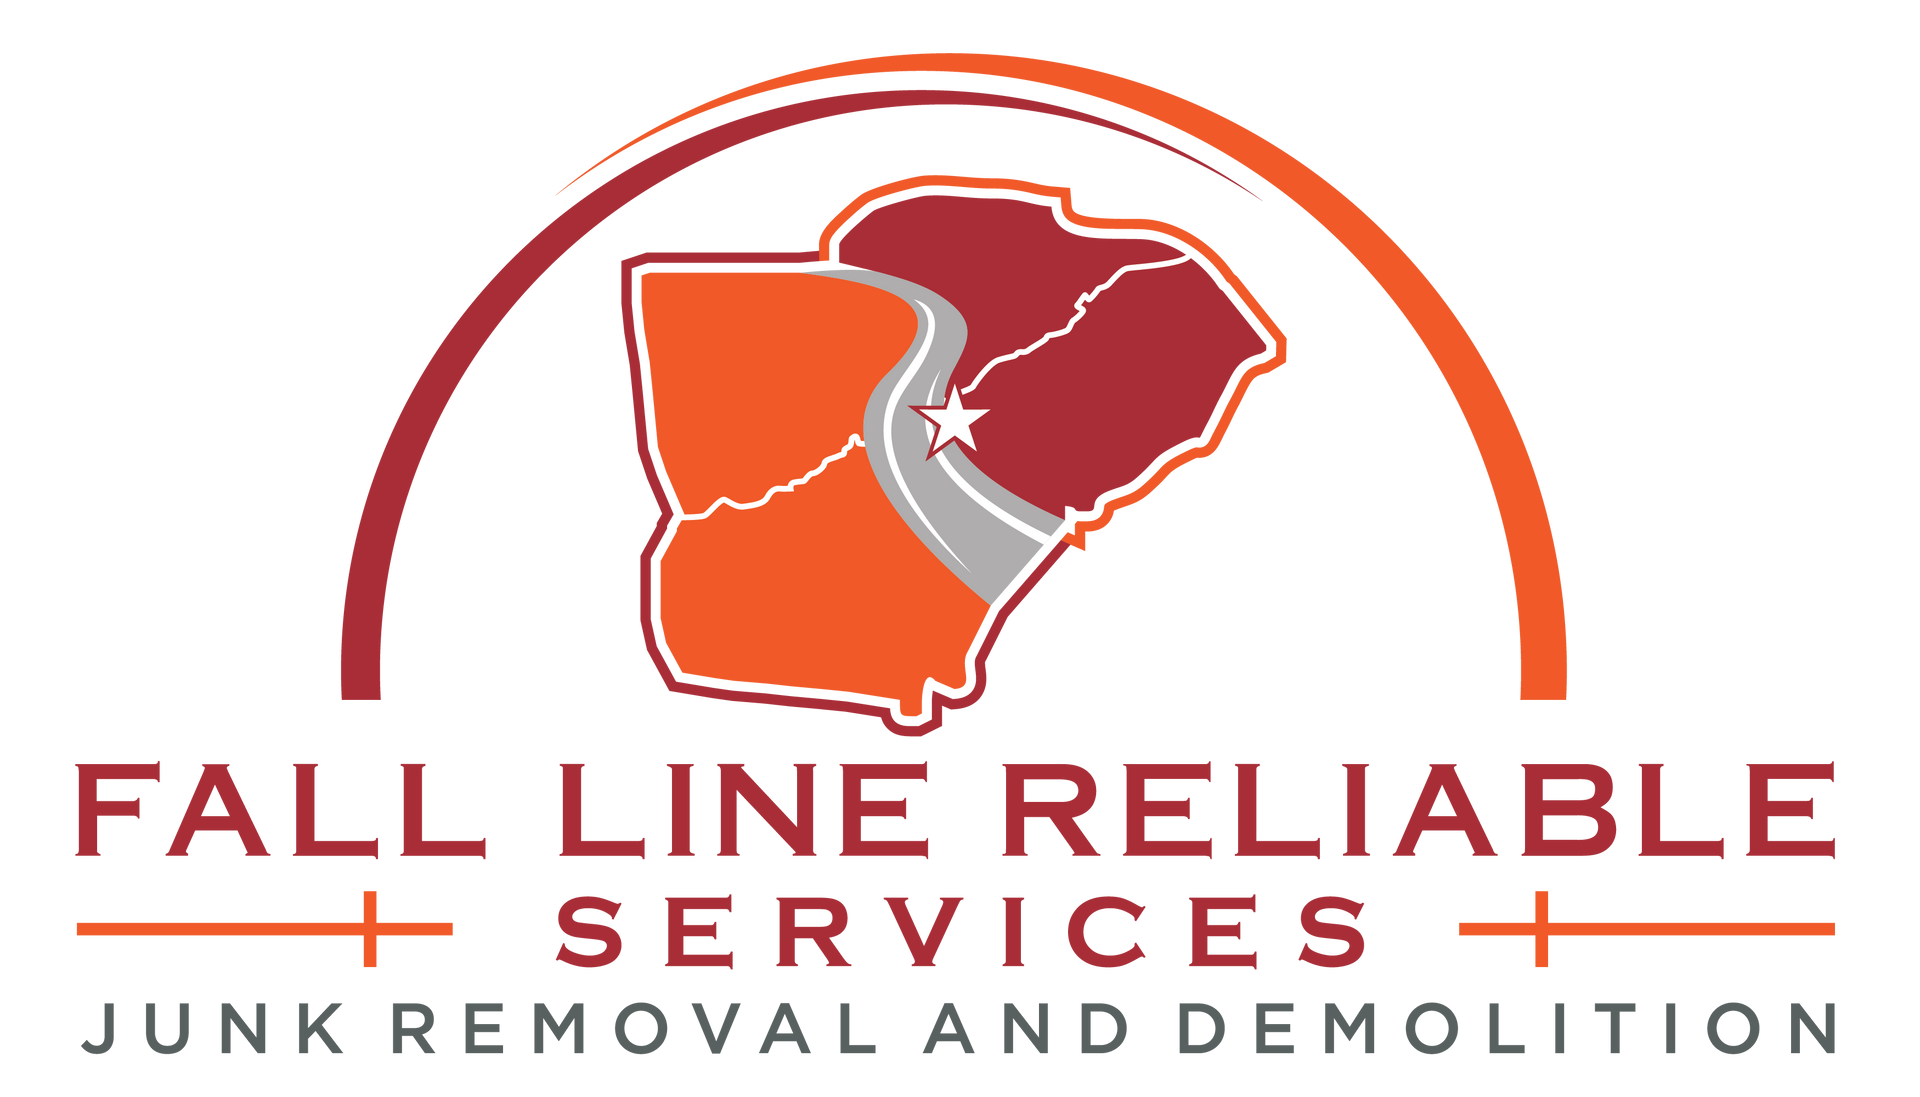 Fall Line Reliable Services Logo - best residential and commercial junk hauling services in north augusta and the csra, fall line reliable services